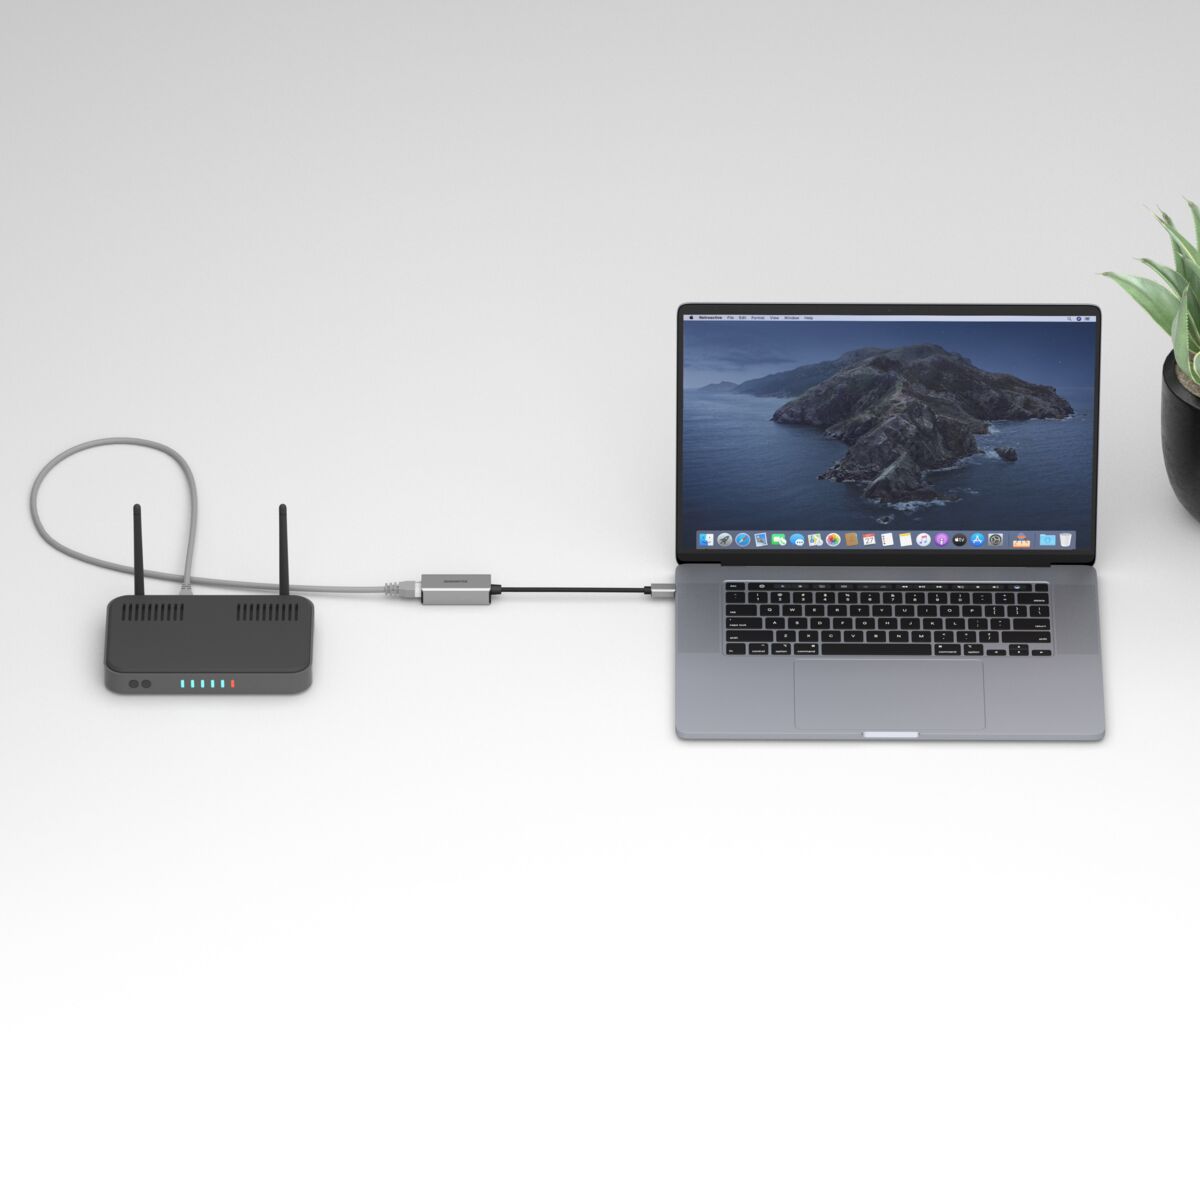 USB-C to Ethernet adapter - Ambiance Image of a router connected to a laptop using an USB-C to Ethernet adapter | Marmitek